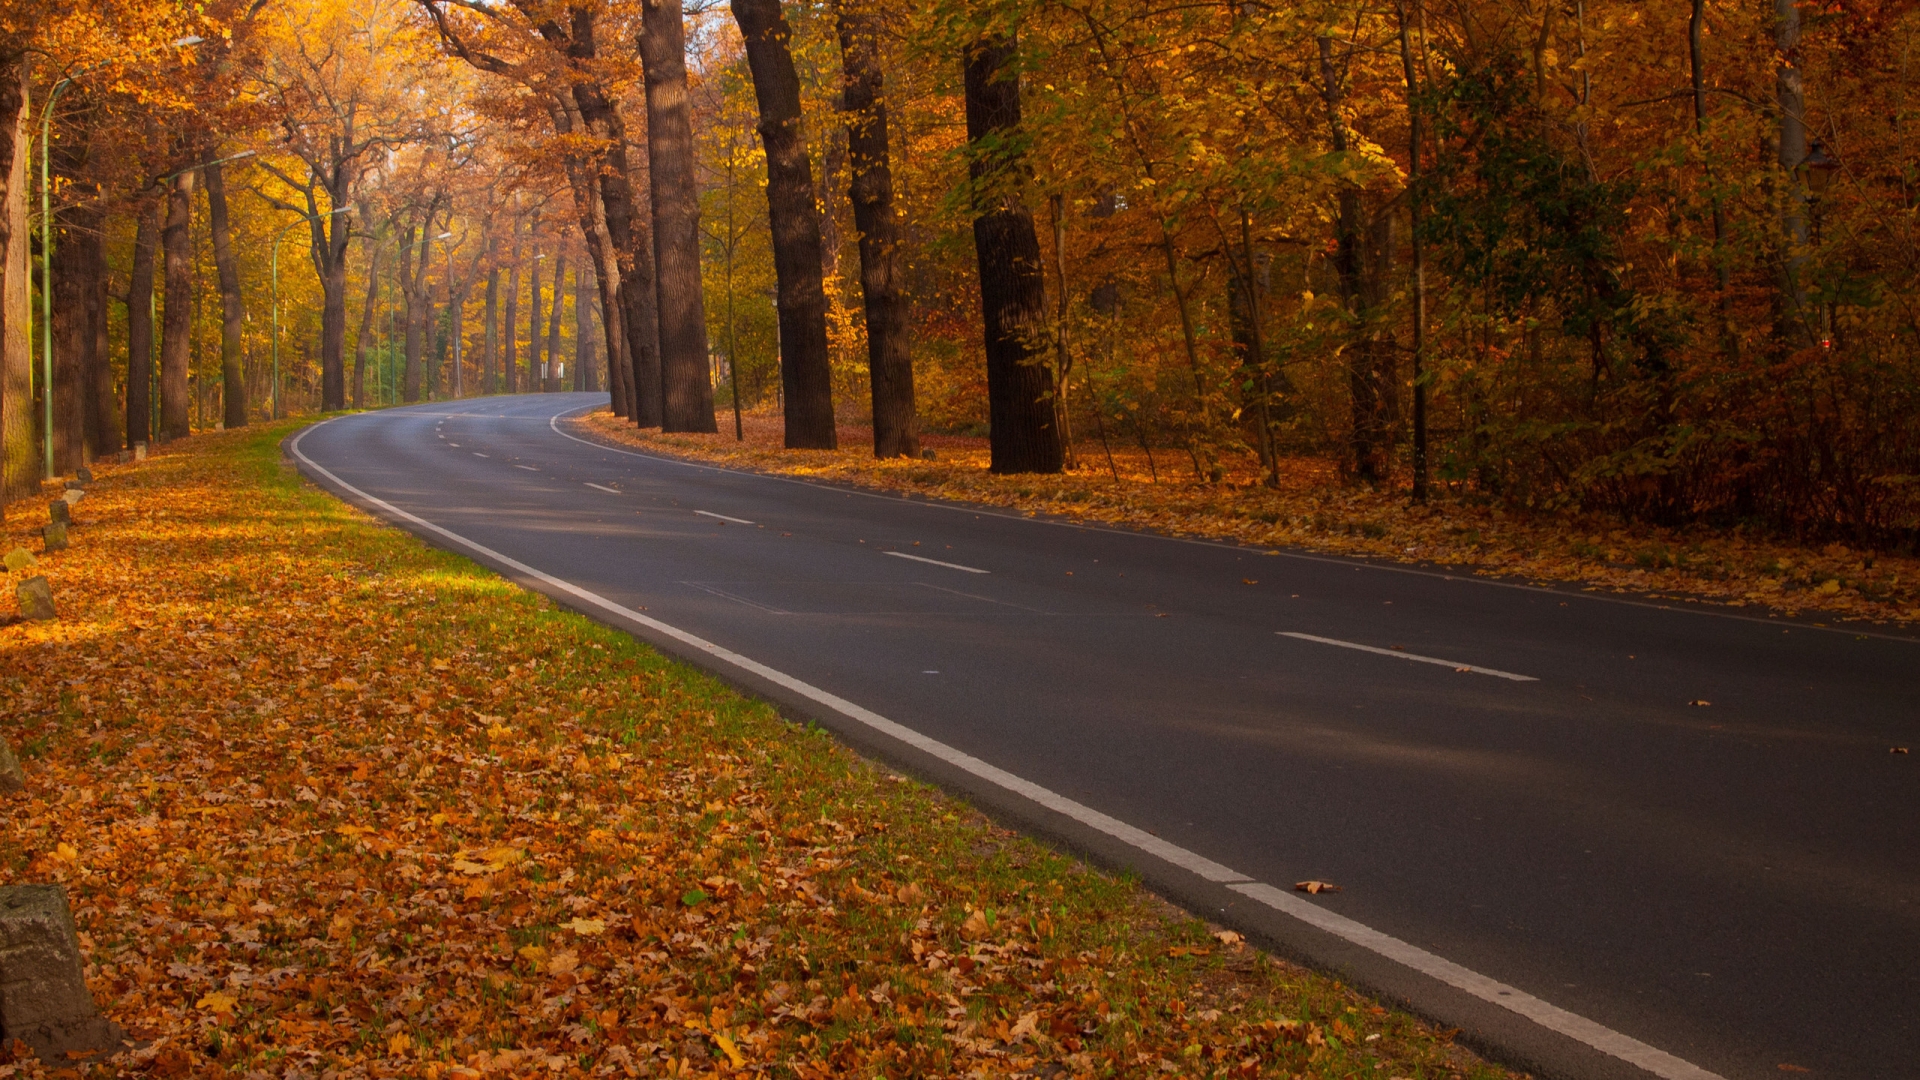 Road through Autumn Woods for 1920 x 1080 HDTV 1080p resolution